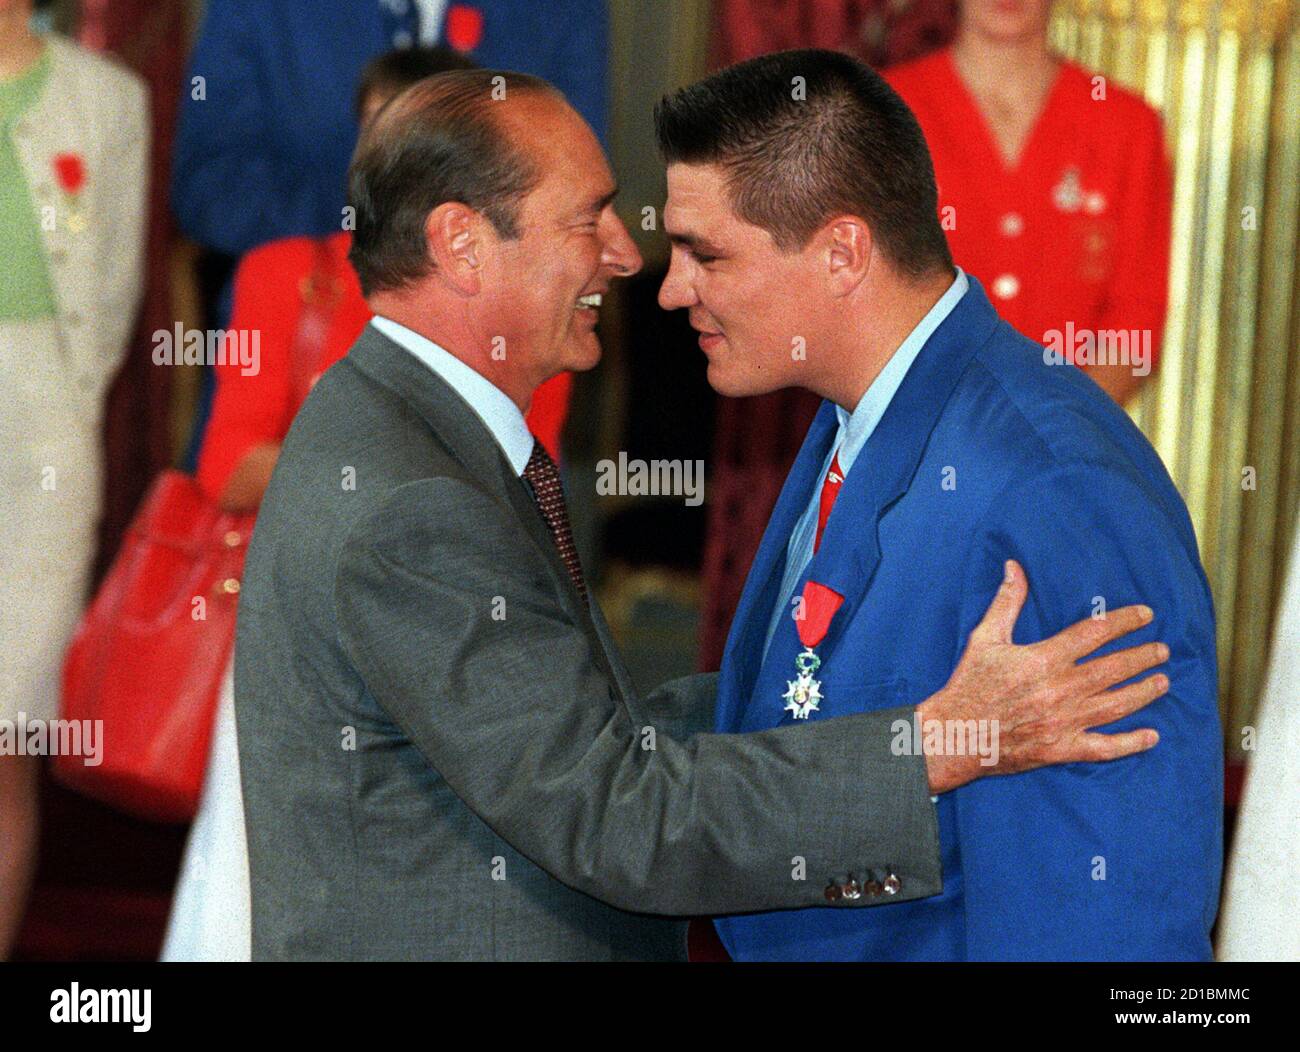 French President Jacques Chirac (L) embraces David Douillet (L), France's  Judo heavyweight gold medalist, after awarding him the Legion of Honour  medal at the Elysee Palace, September 6. France who won 15